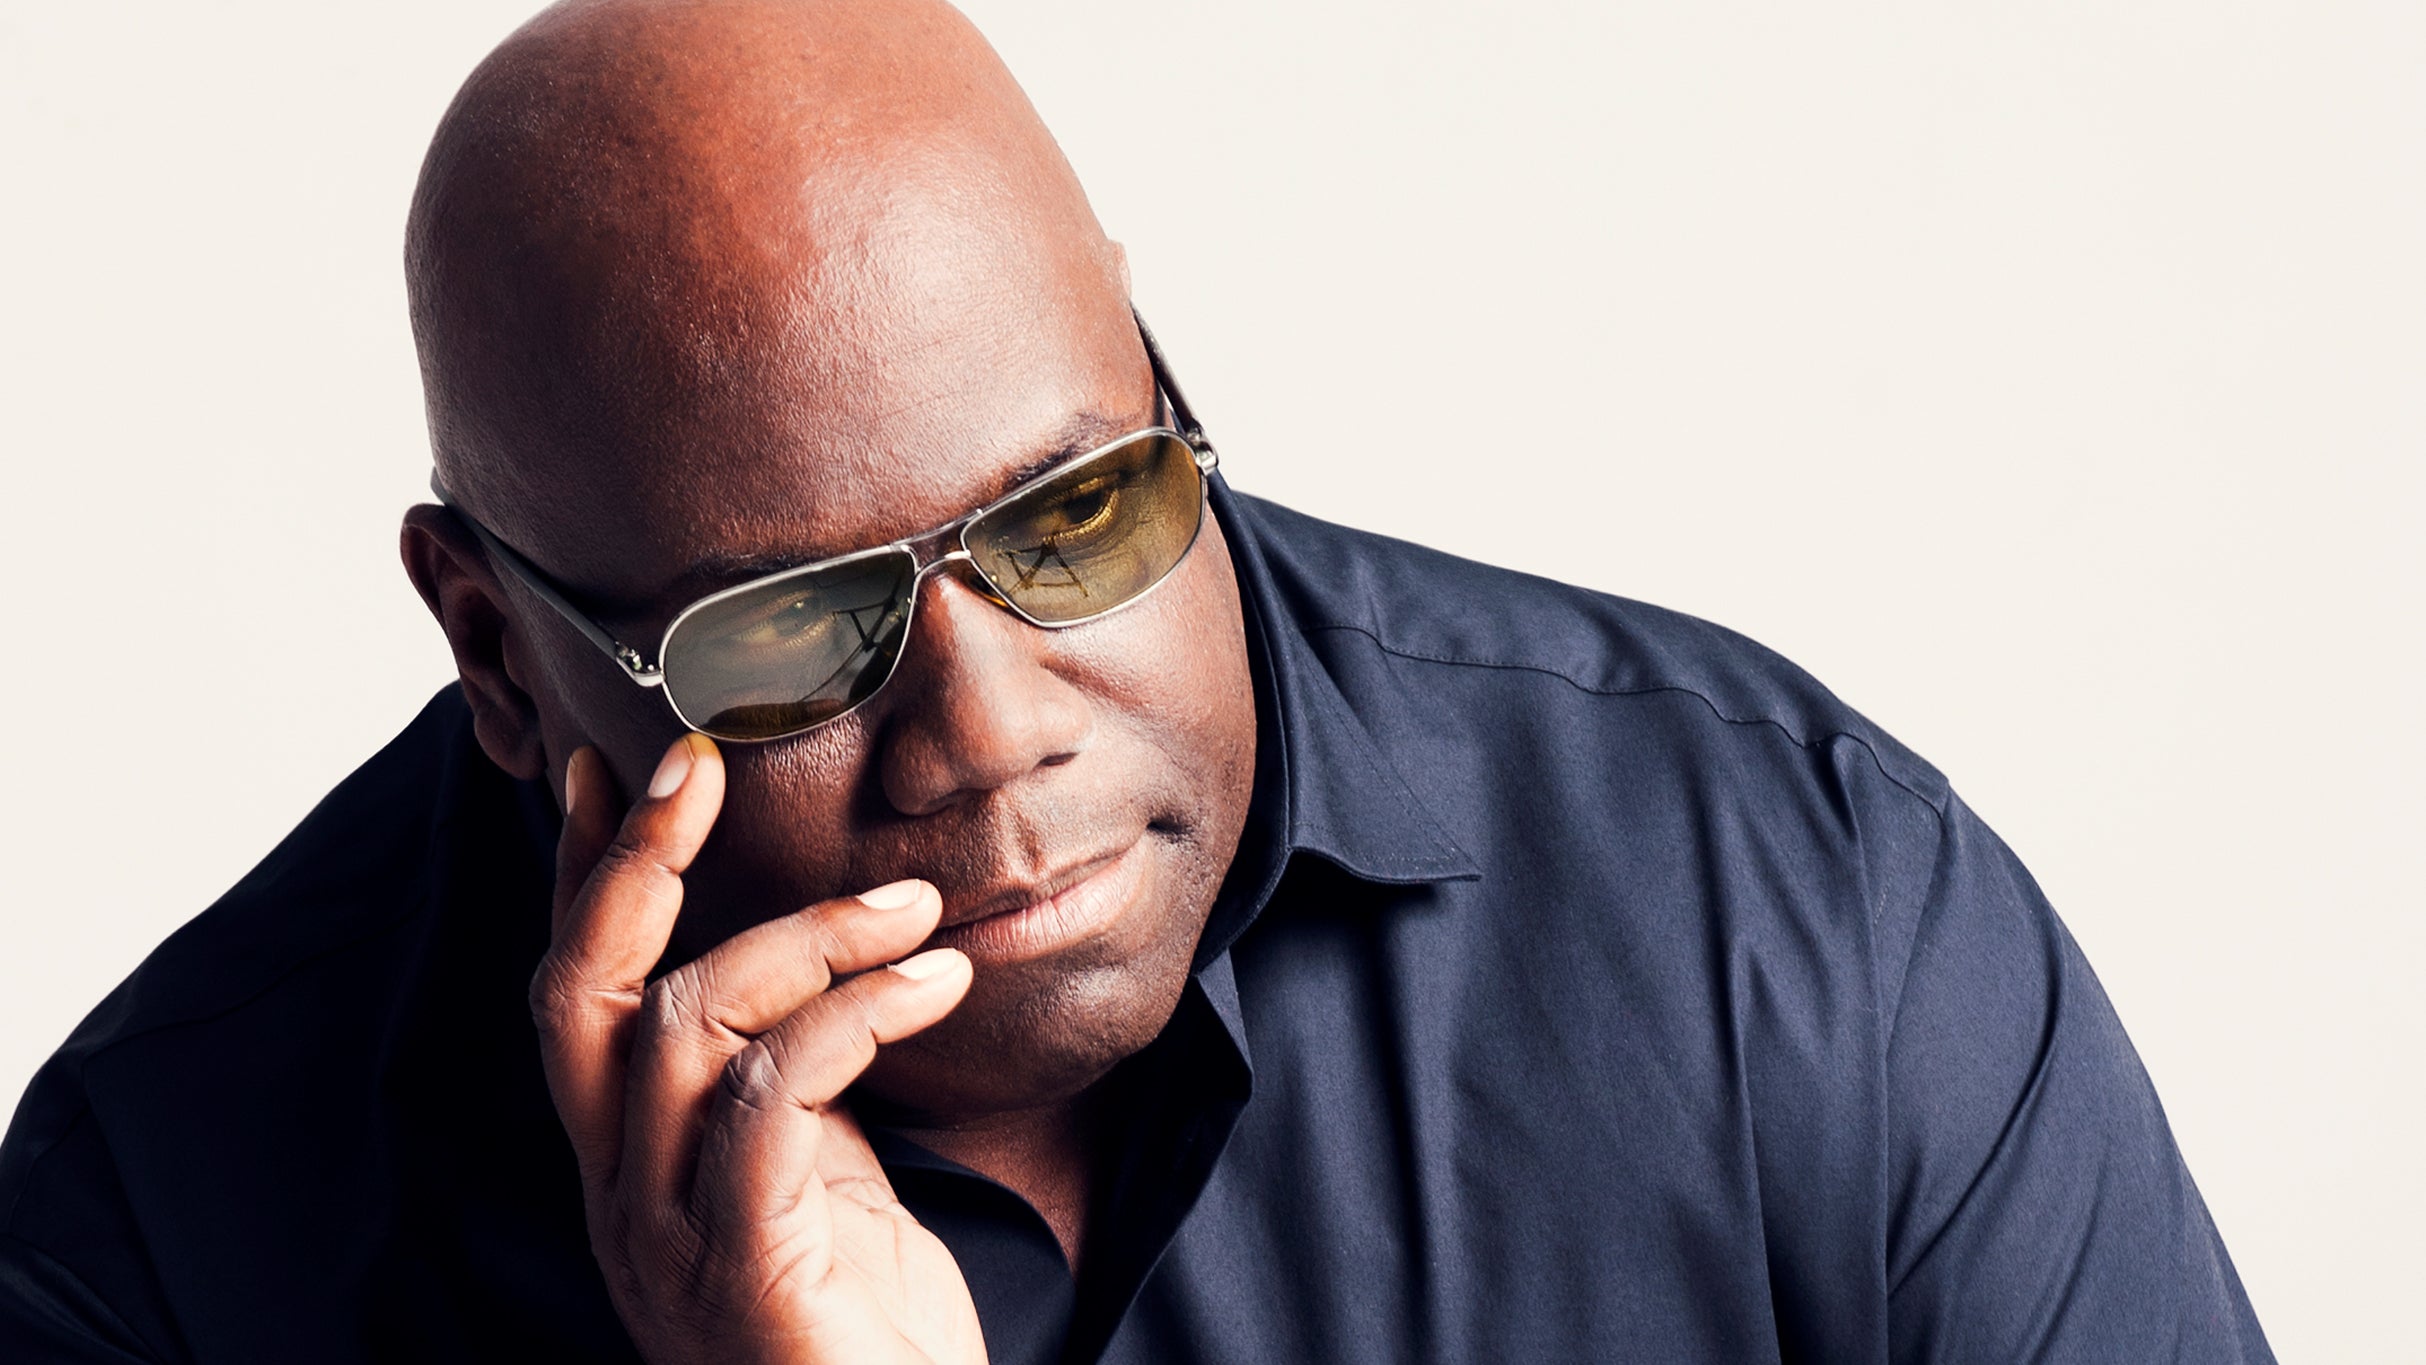 Carl Cox Hybrid Set - In The Round in Denver promo photo for Ticketmaster presale offer code